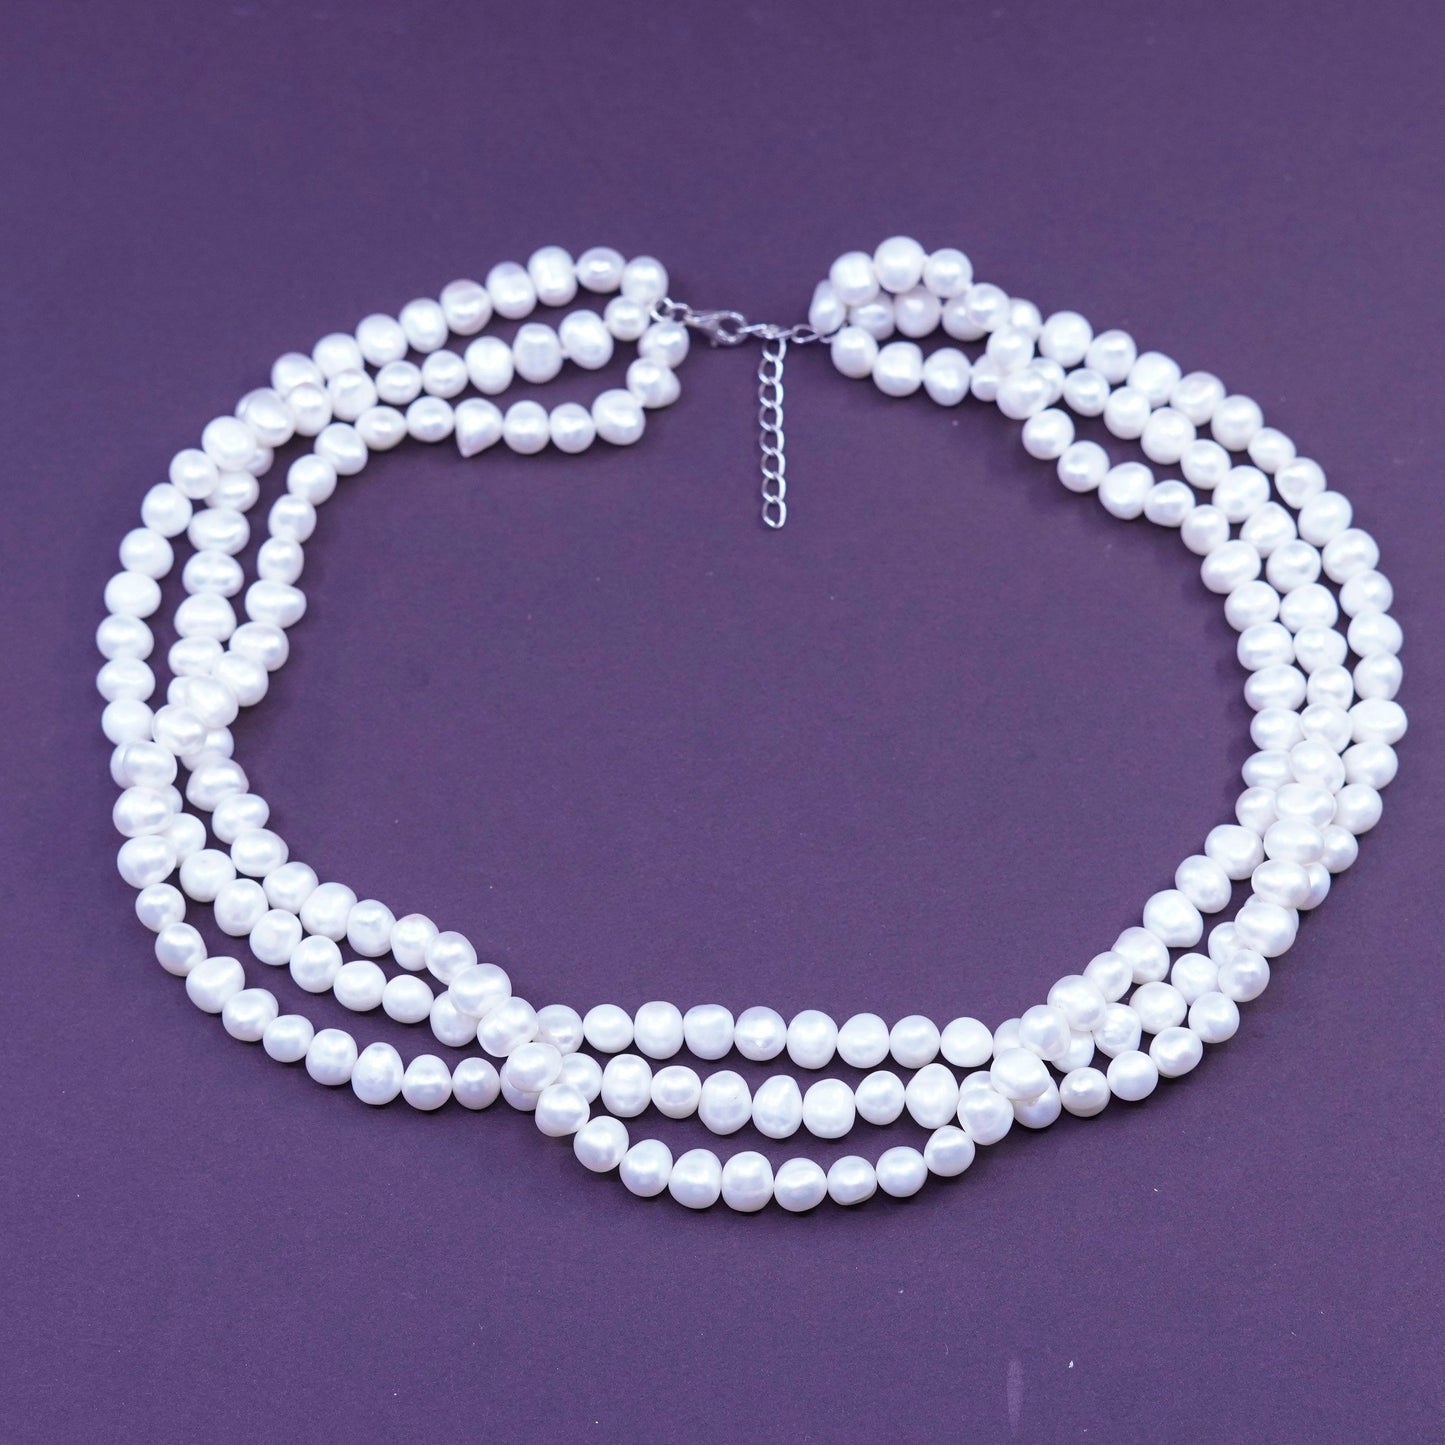 17+1”, triple strand pearl beads handmade necklace, Sterling 925 silver clasp